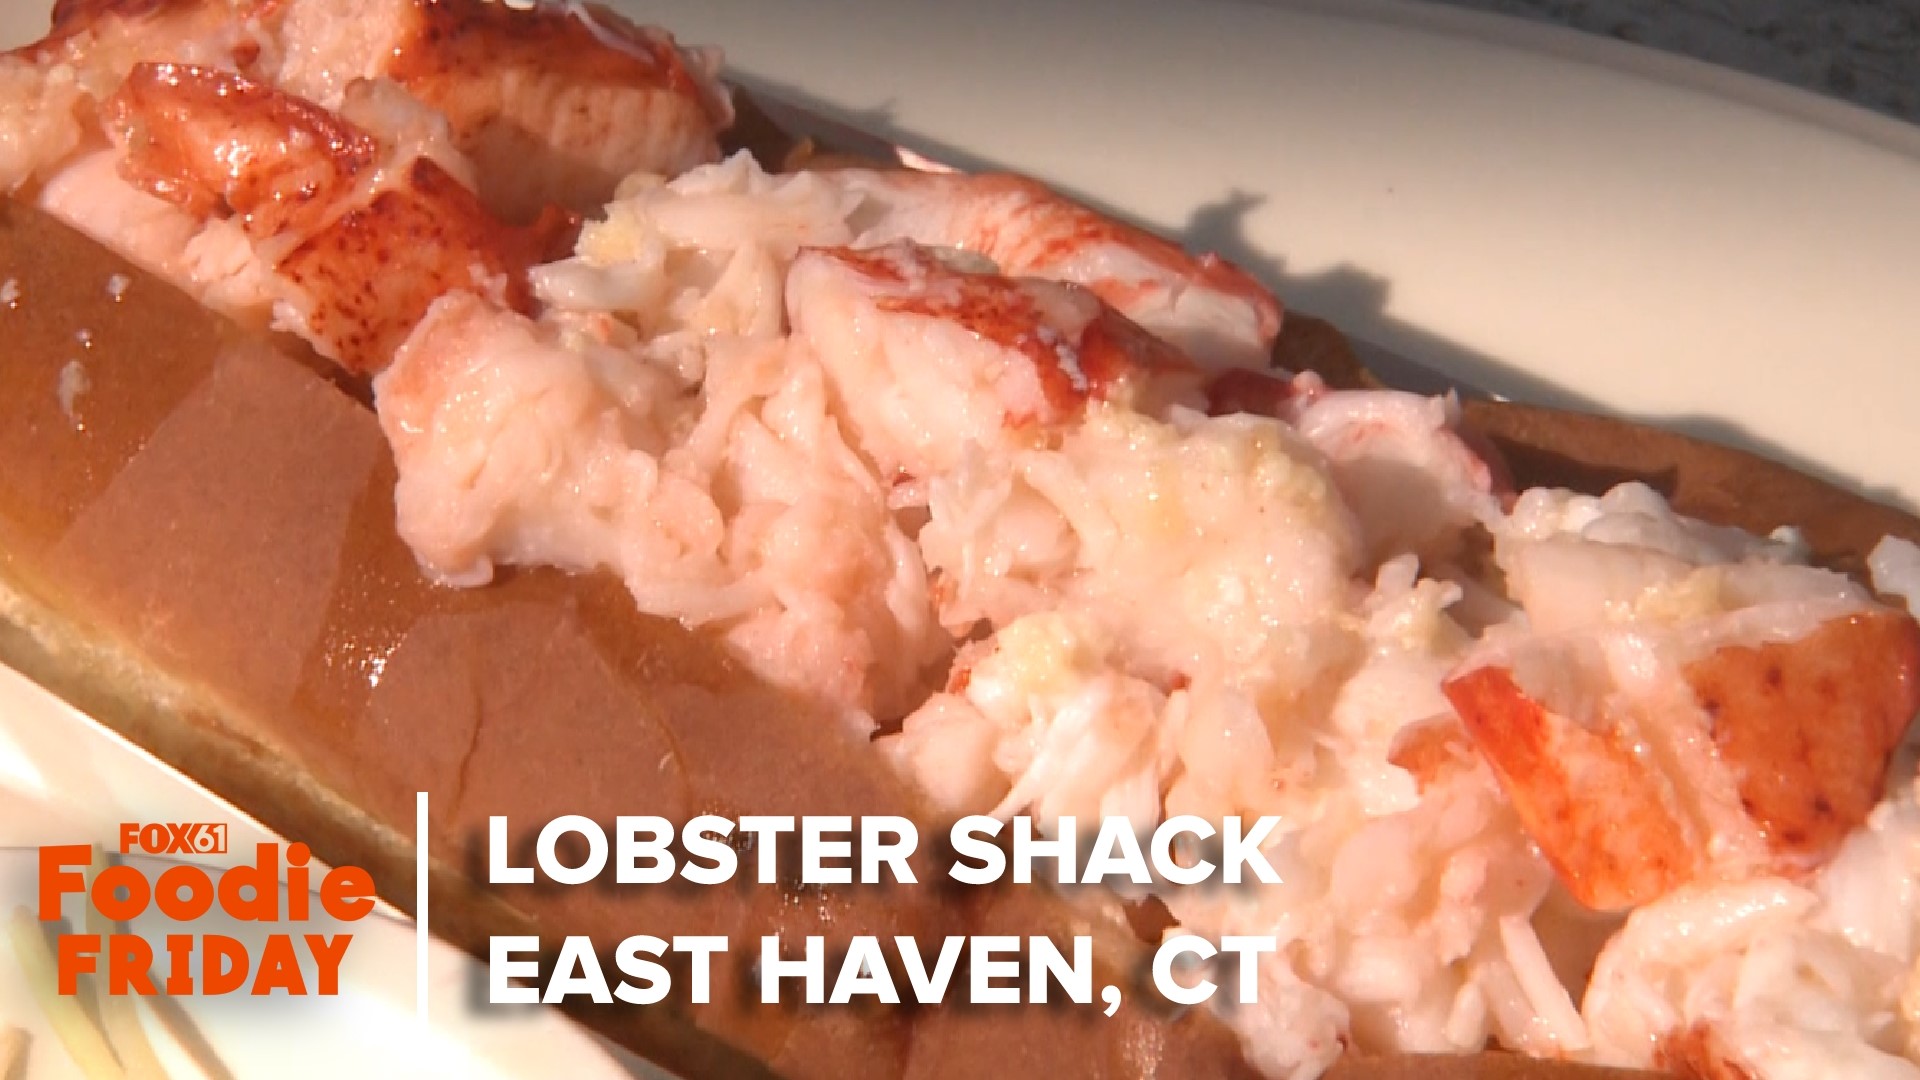 Matt Scott visits Lobster Shack in East Haven to sample some seafood and have his first (hot) lobster roll of the season.